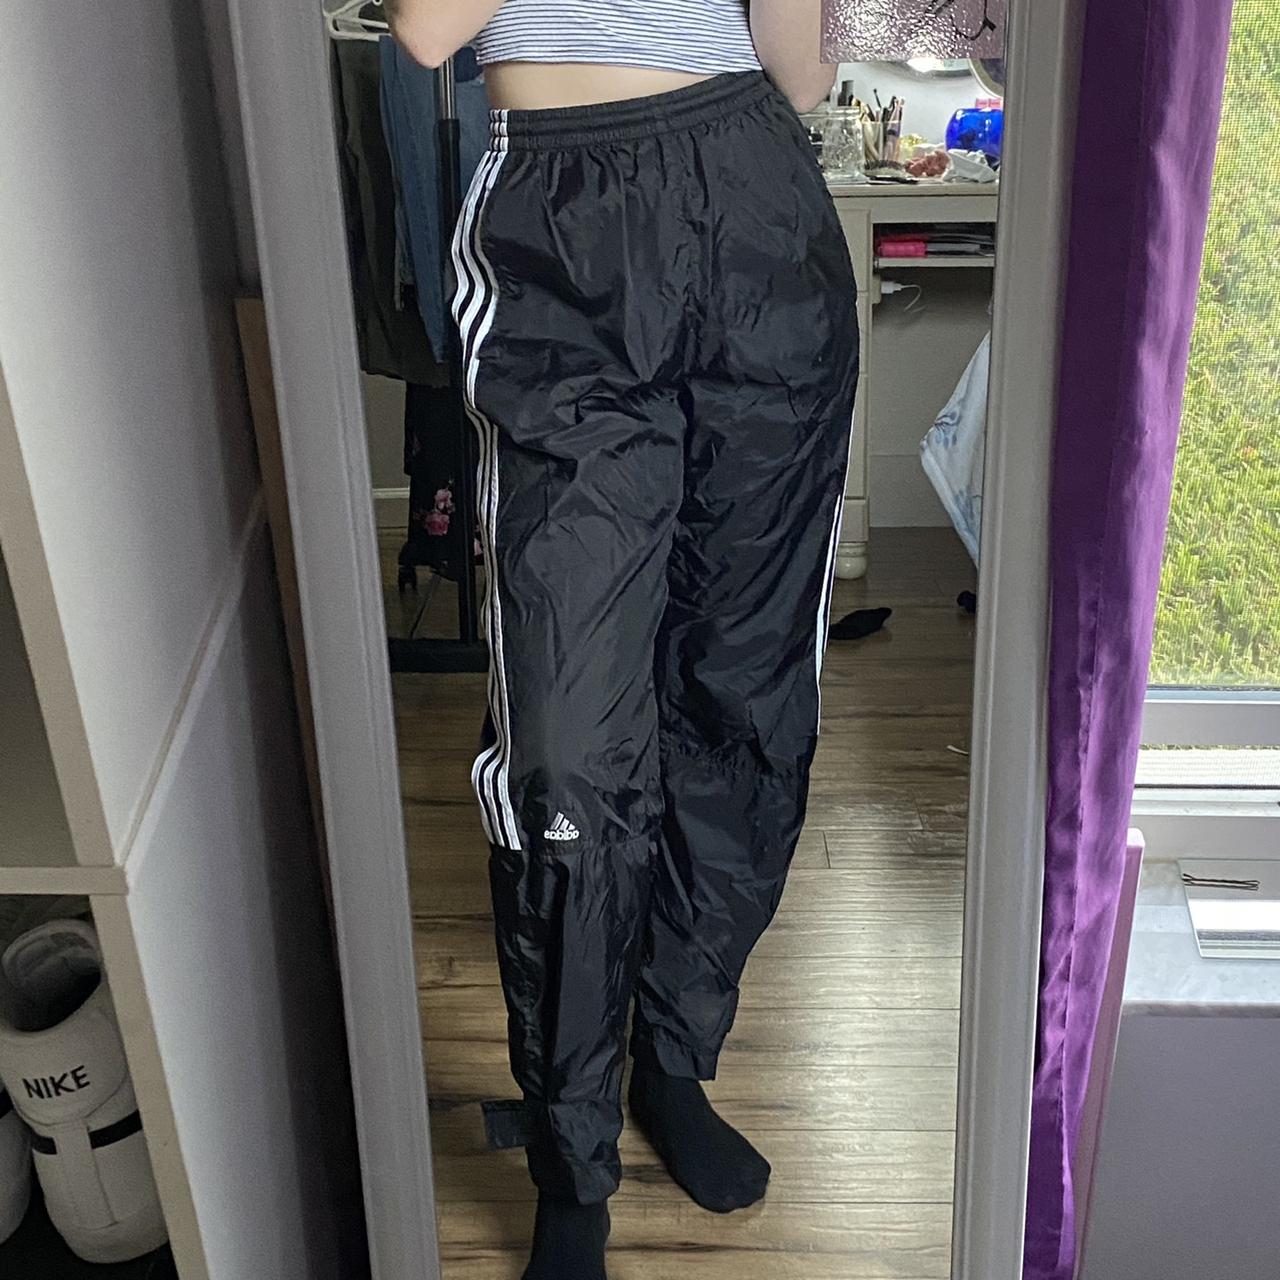 🌟adidas windbreaker pants!, these pants are the